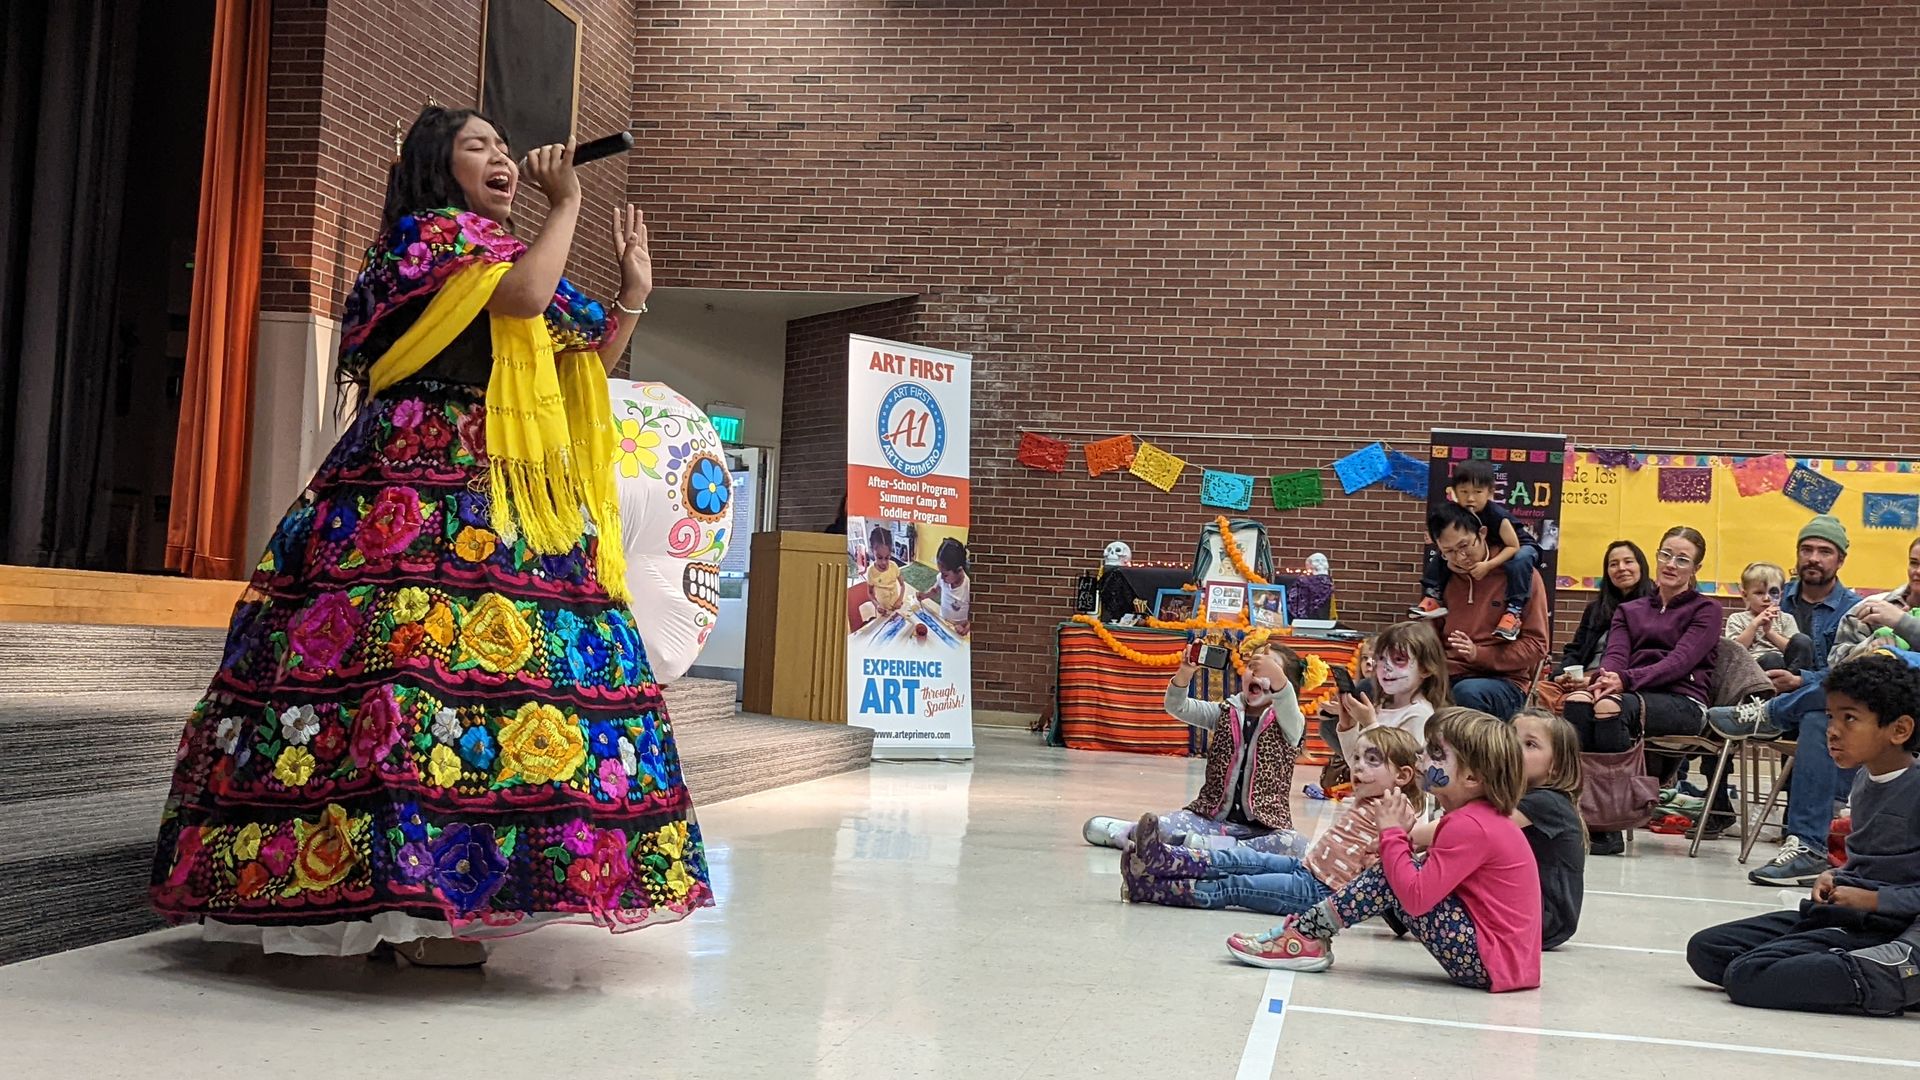 A girl in a colorful dress with a hoop skirt sings in front of children in an elementary school gymnasium.